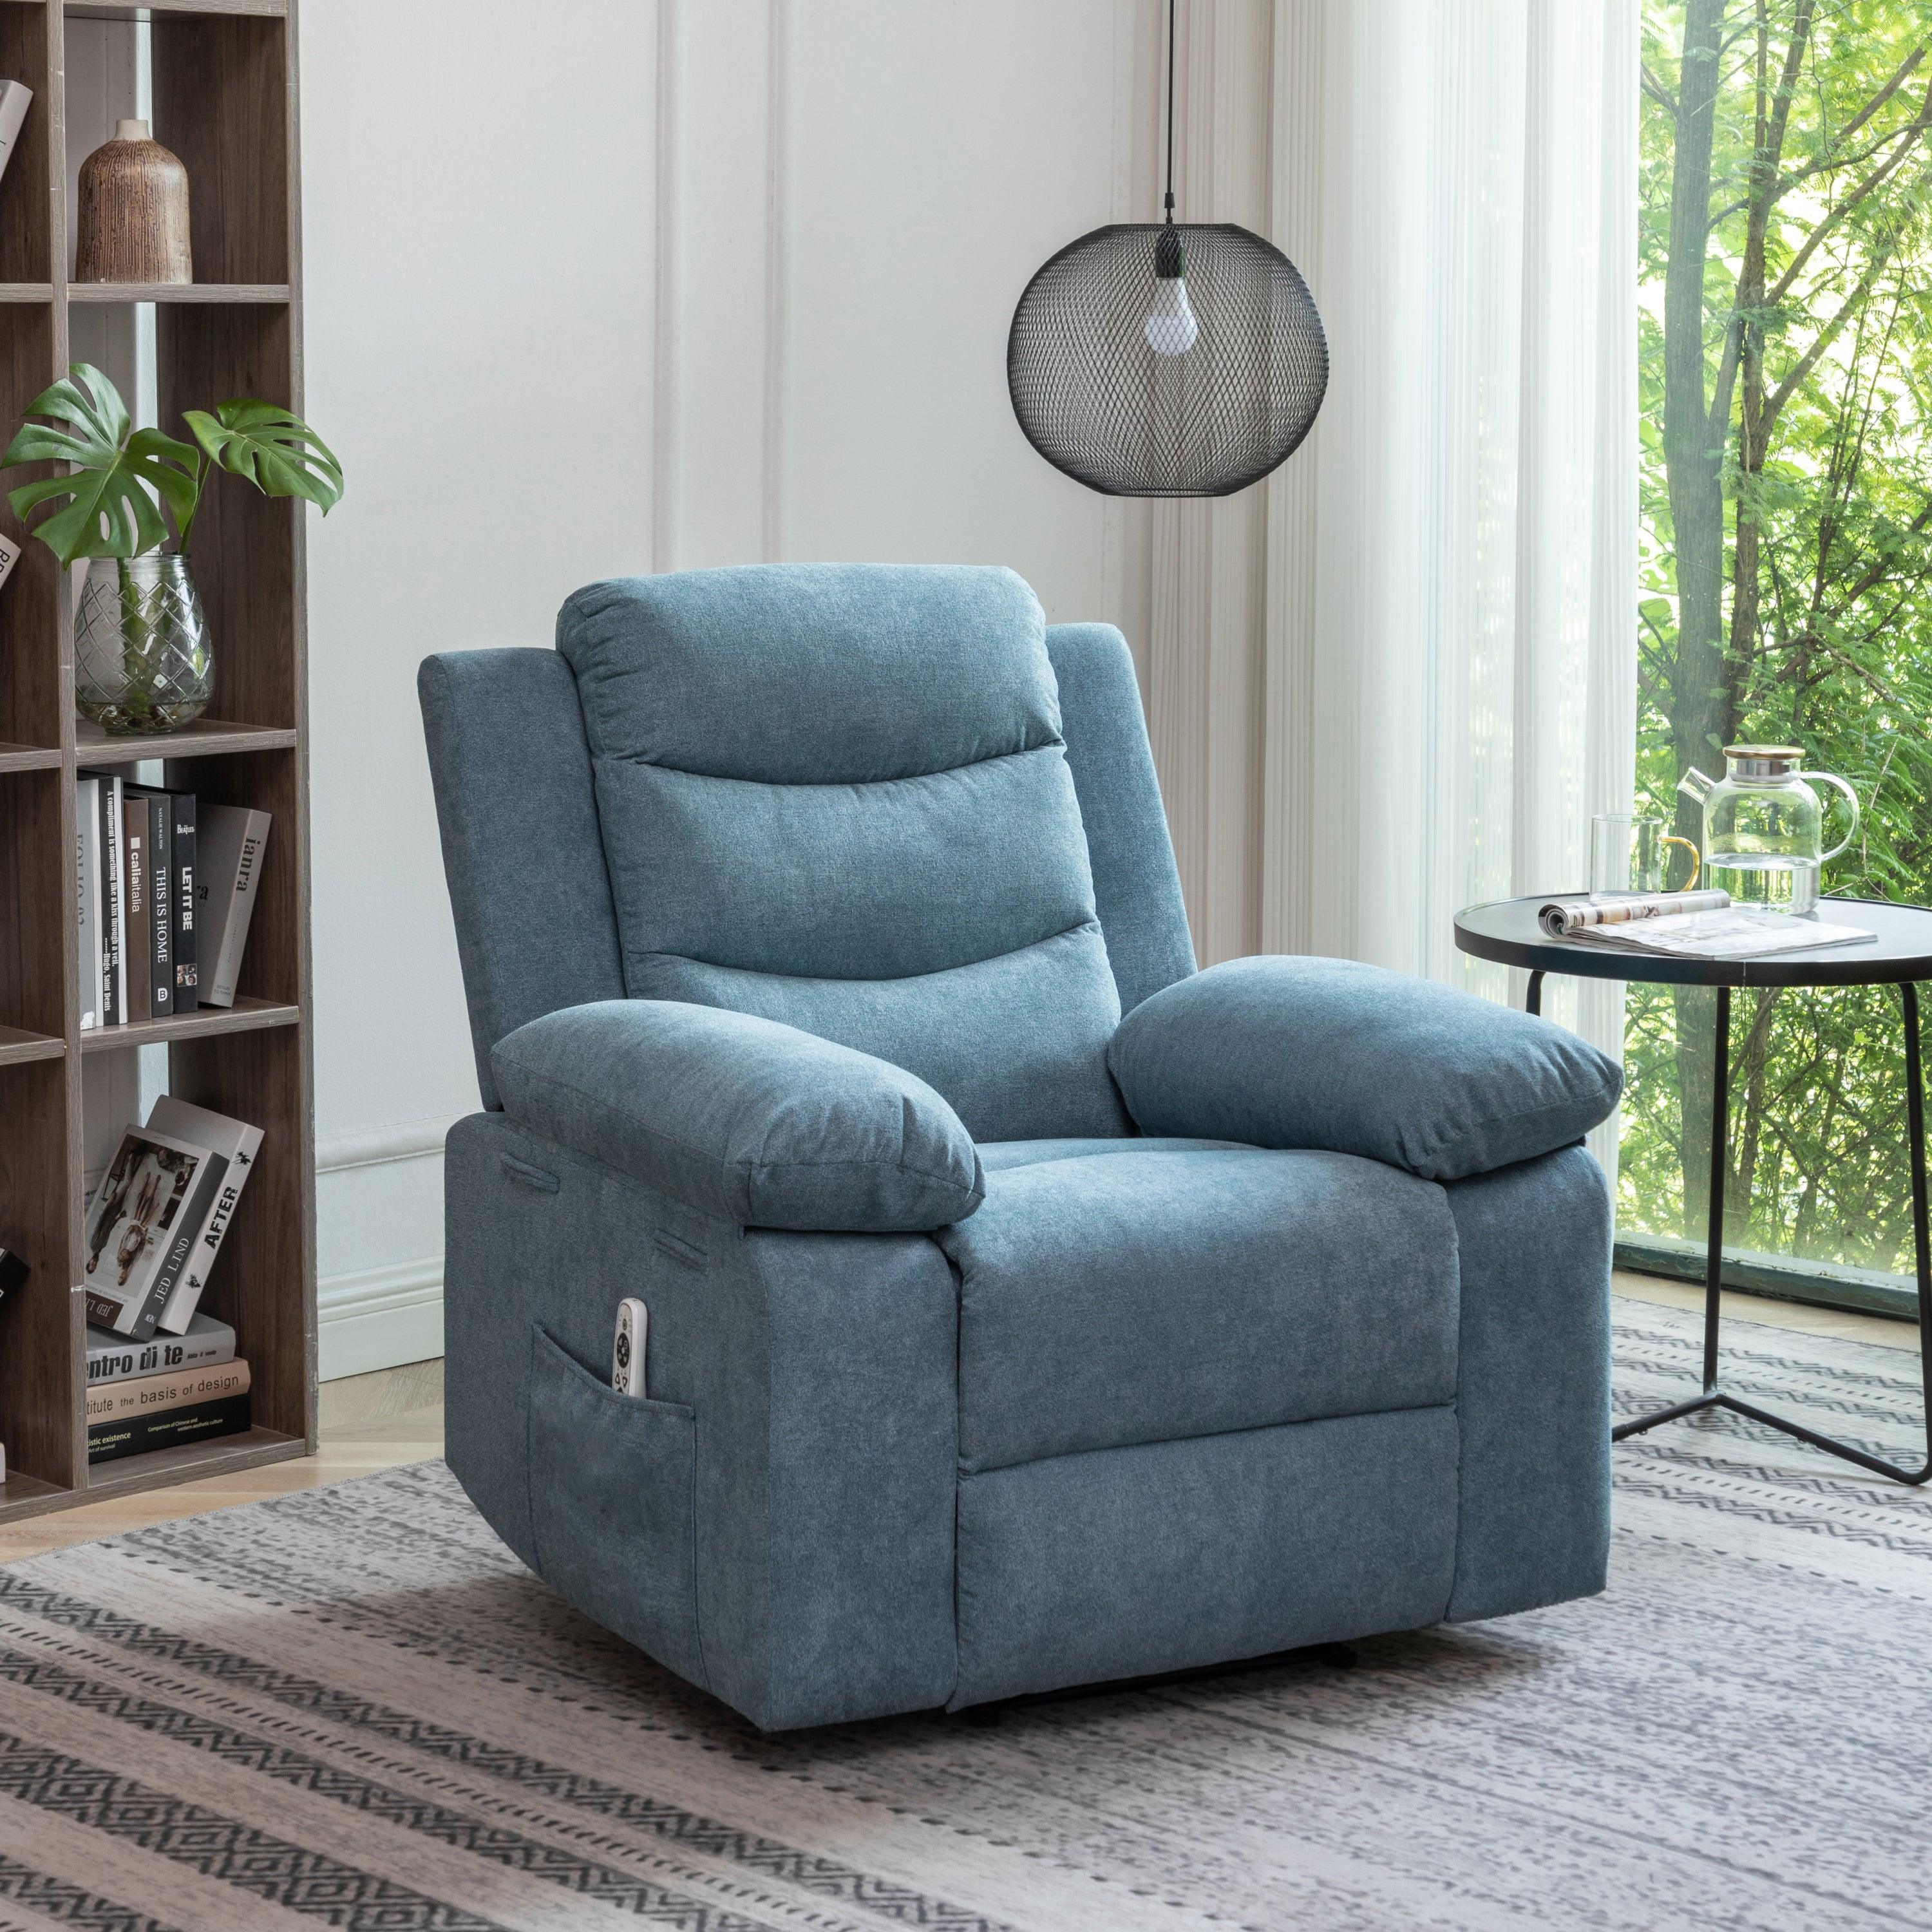 🆓🚛 Pustin Power Fabric Recliner Chair With Adjustable Massage Functions - Blue